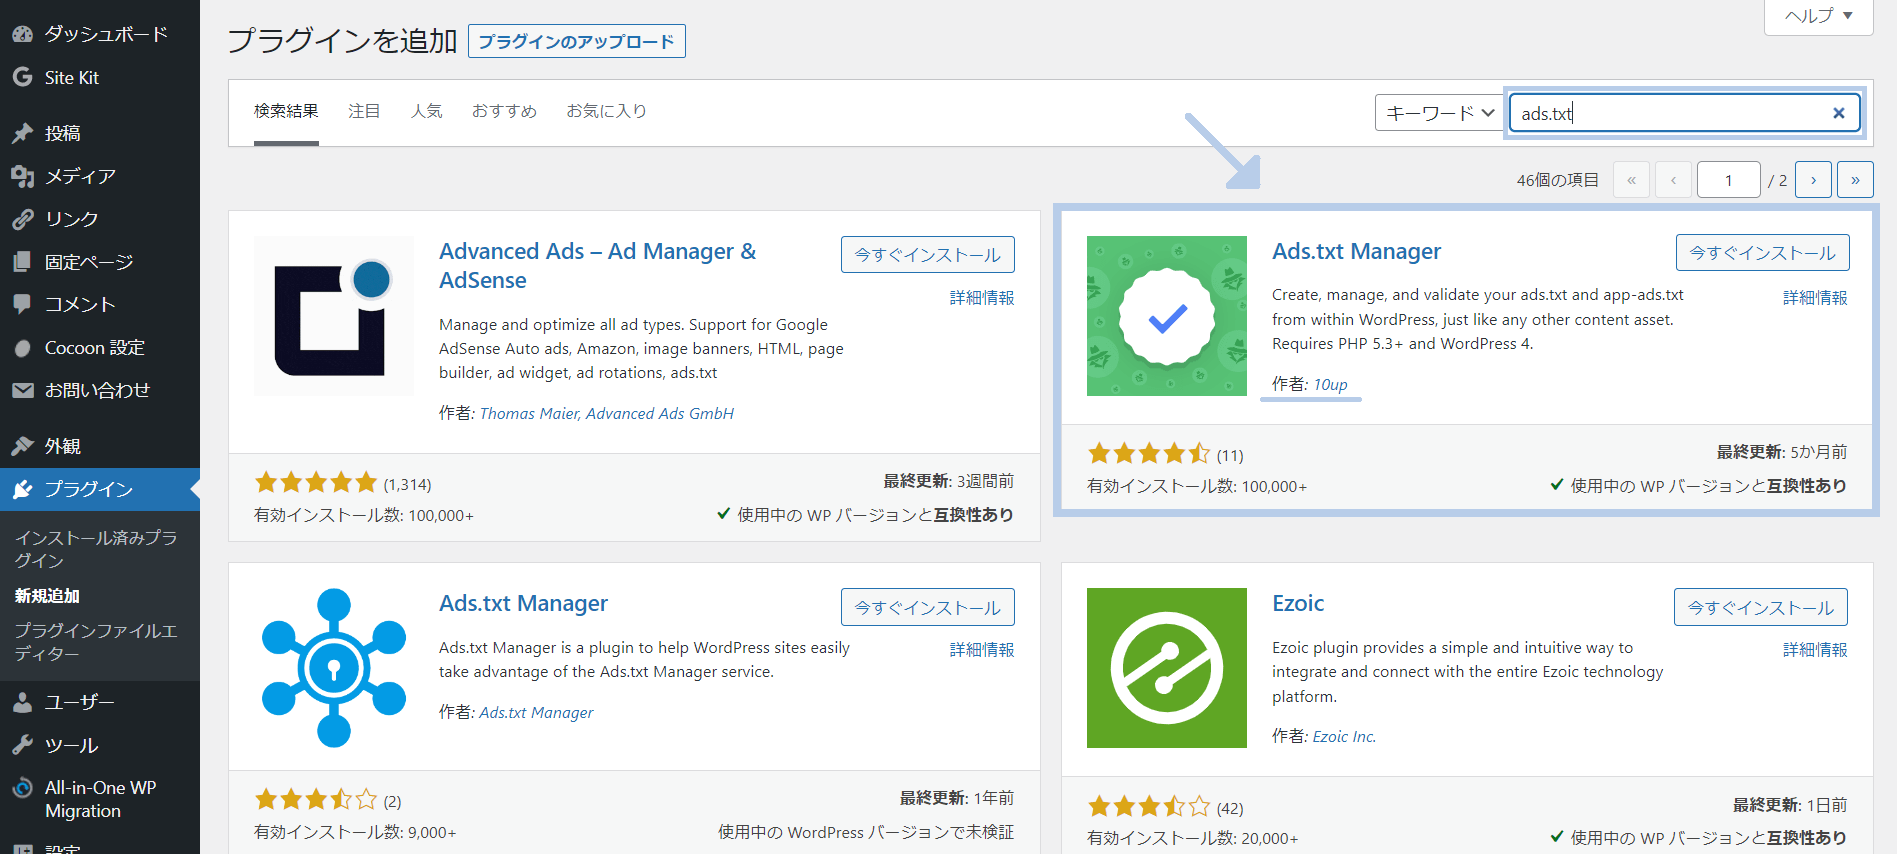 2.【Ads.txt Manager】「Save Changes」ボタン押せない問題を解決【AdSense】